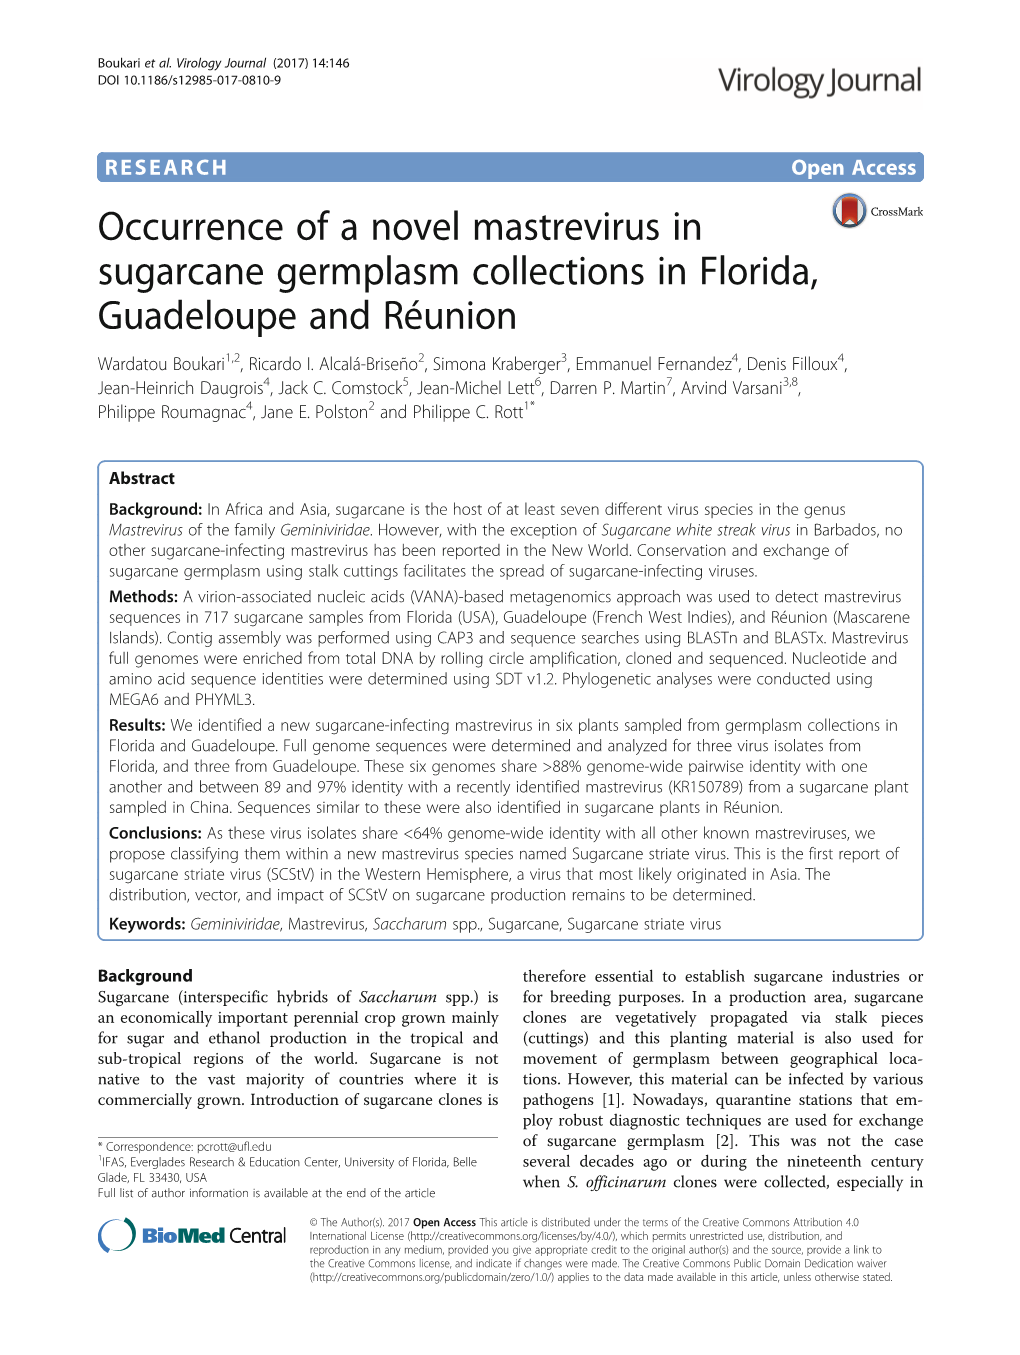 Occurrence of a Novel Mastrevirus in Sugarcane Germplasm Collections in Florida, Guadeloupe and Réunion Wardatou Boukari1,2, Ricardo I